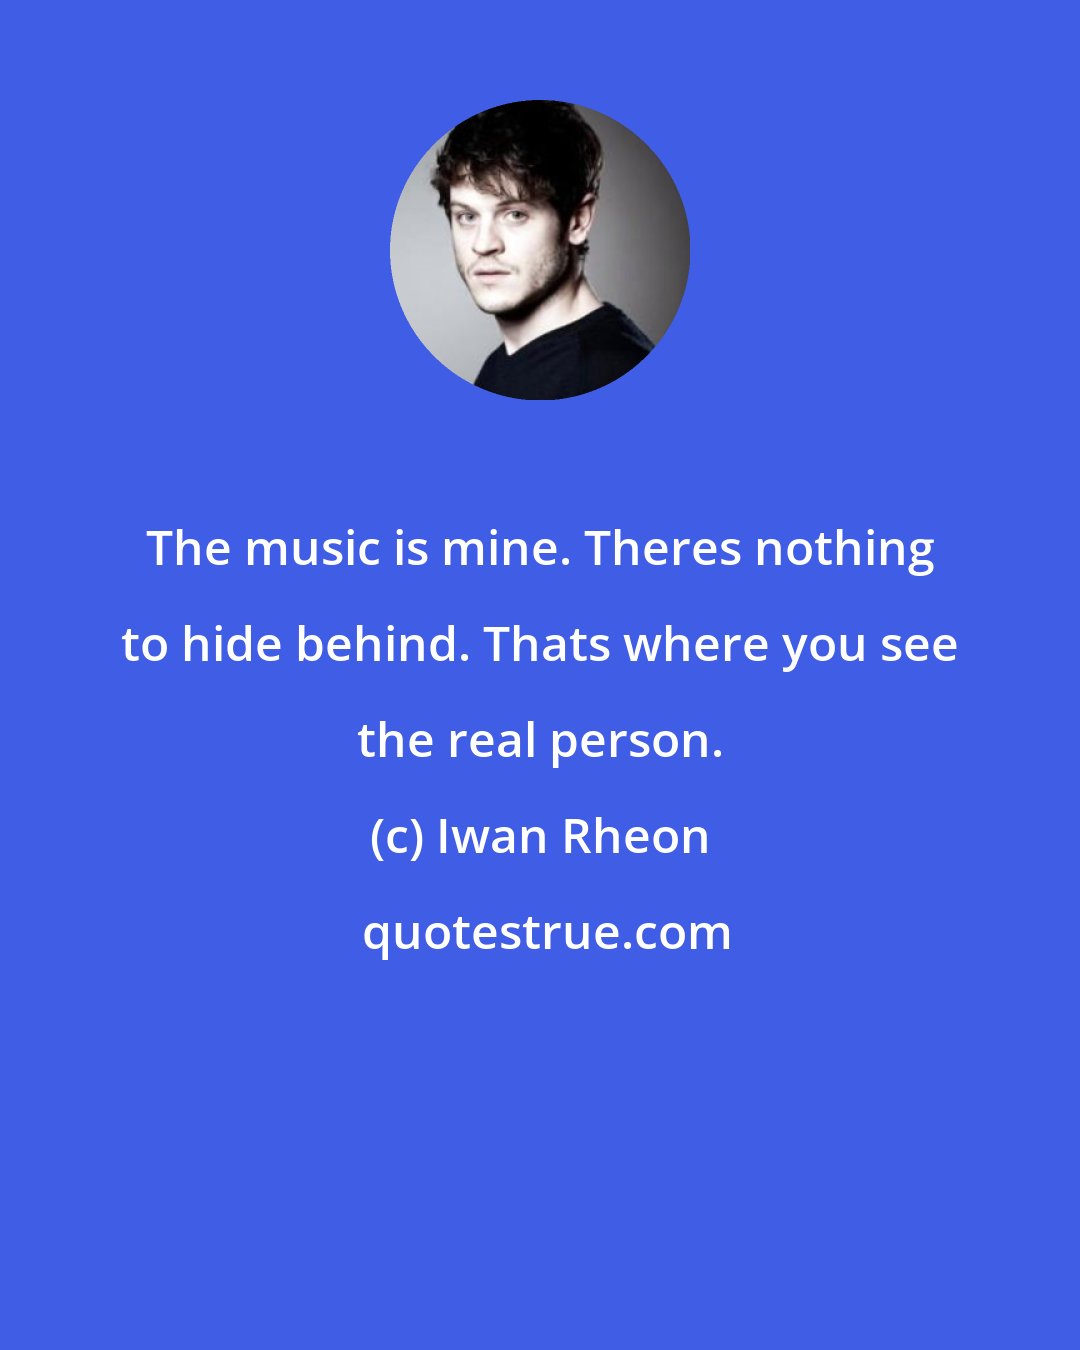 Iwan Rheon: The music is mine. Theres nothing to hide behind. Thats where you see the real person.